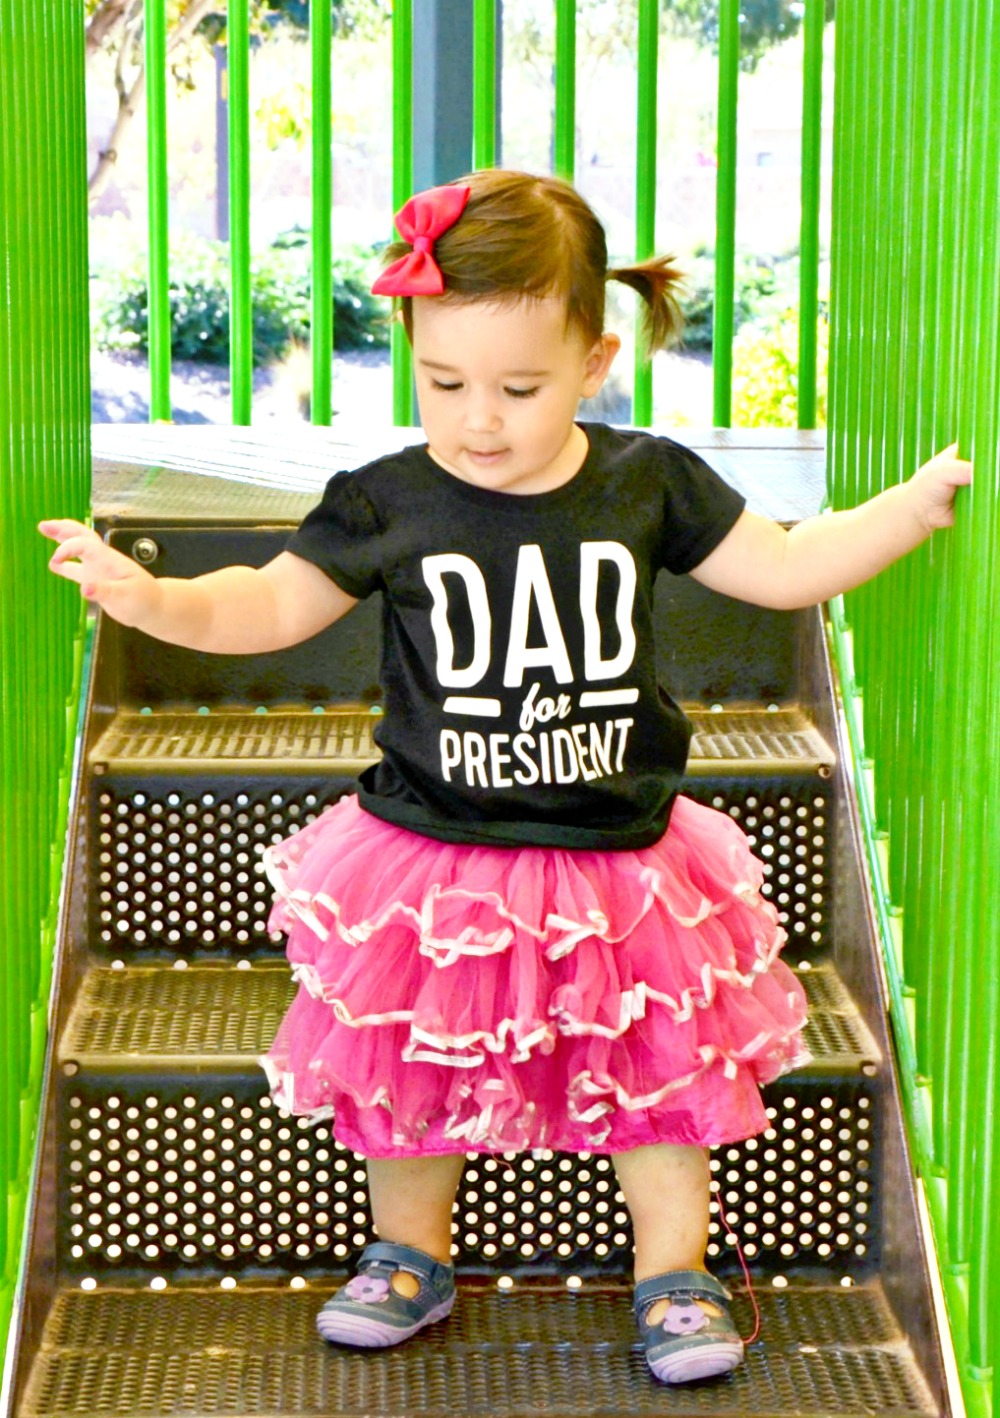 This Dad for President shirt is the cutest!